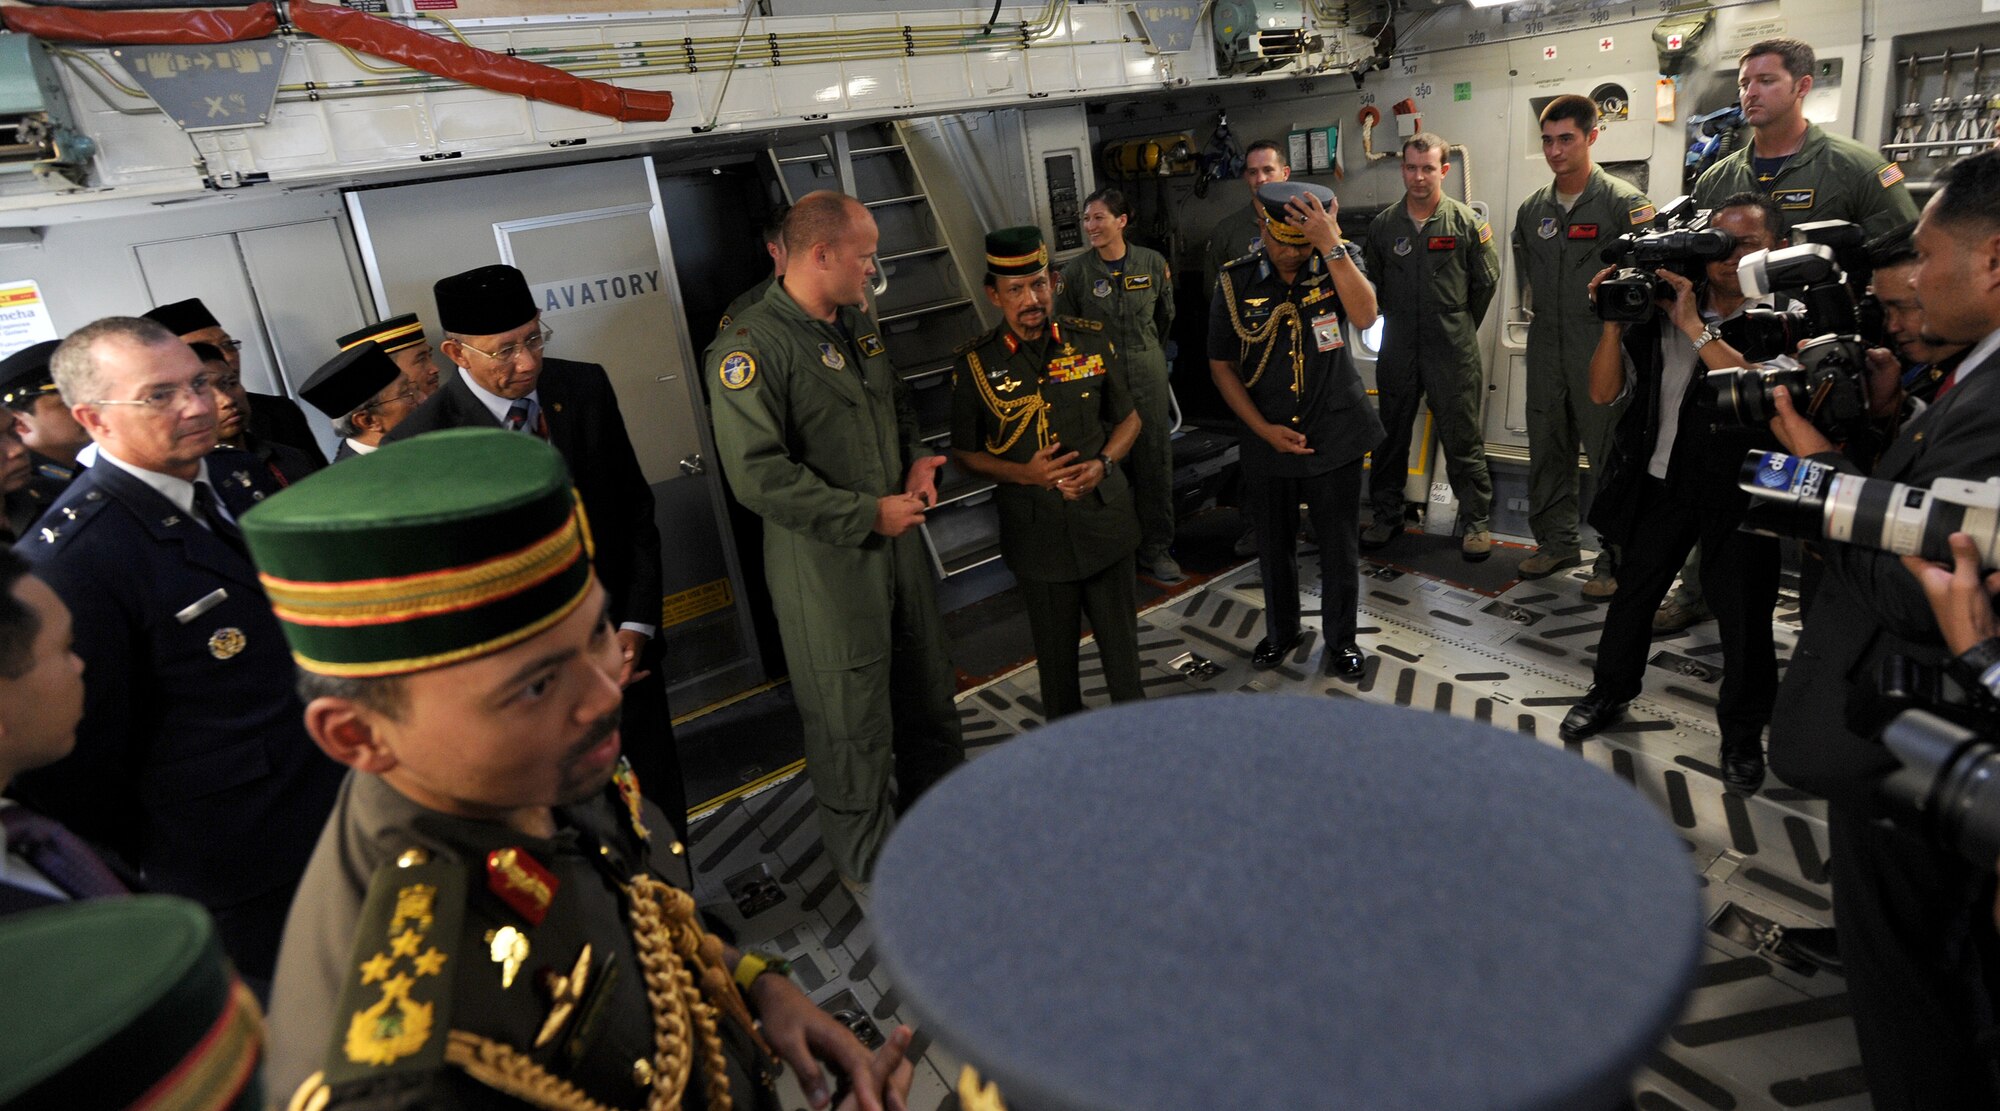 Maj. Chris Ross, Pacific Air Forces demonstration team copilot, center left, provides a guided tour aboard a C-17 Globemaster III to His Majesty Sultan Haji Hassanal Bolkiahsutan of Brunei, center right, and members of his entourage during the 4th biennial Brunei Darussalam International Defense Exhibition, at Rimba Air Base, Dec. 3, 2013. JBPPH personnel will be showcasing the C-17 through static displays and aerial demonstrations during BRIDEX. The exhibition is an opportunity for networking and sharing technology with regional partners and allies, building strong multilateral relationships, increased cooperation and enhanced preparedness for disasters and other contingency operations. (U.S. Air Force photo/Master Sgt. Jerome S. Tayborn)